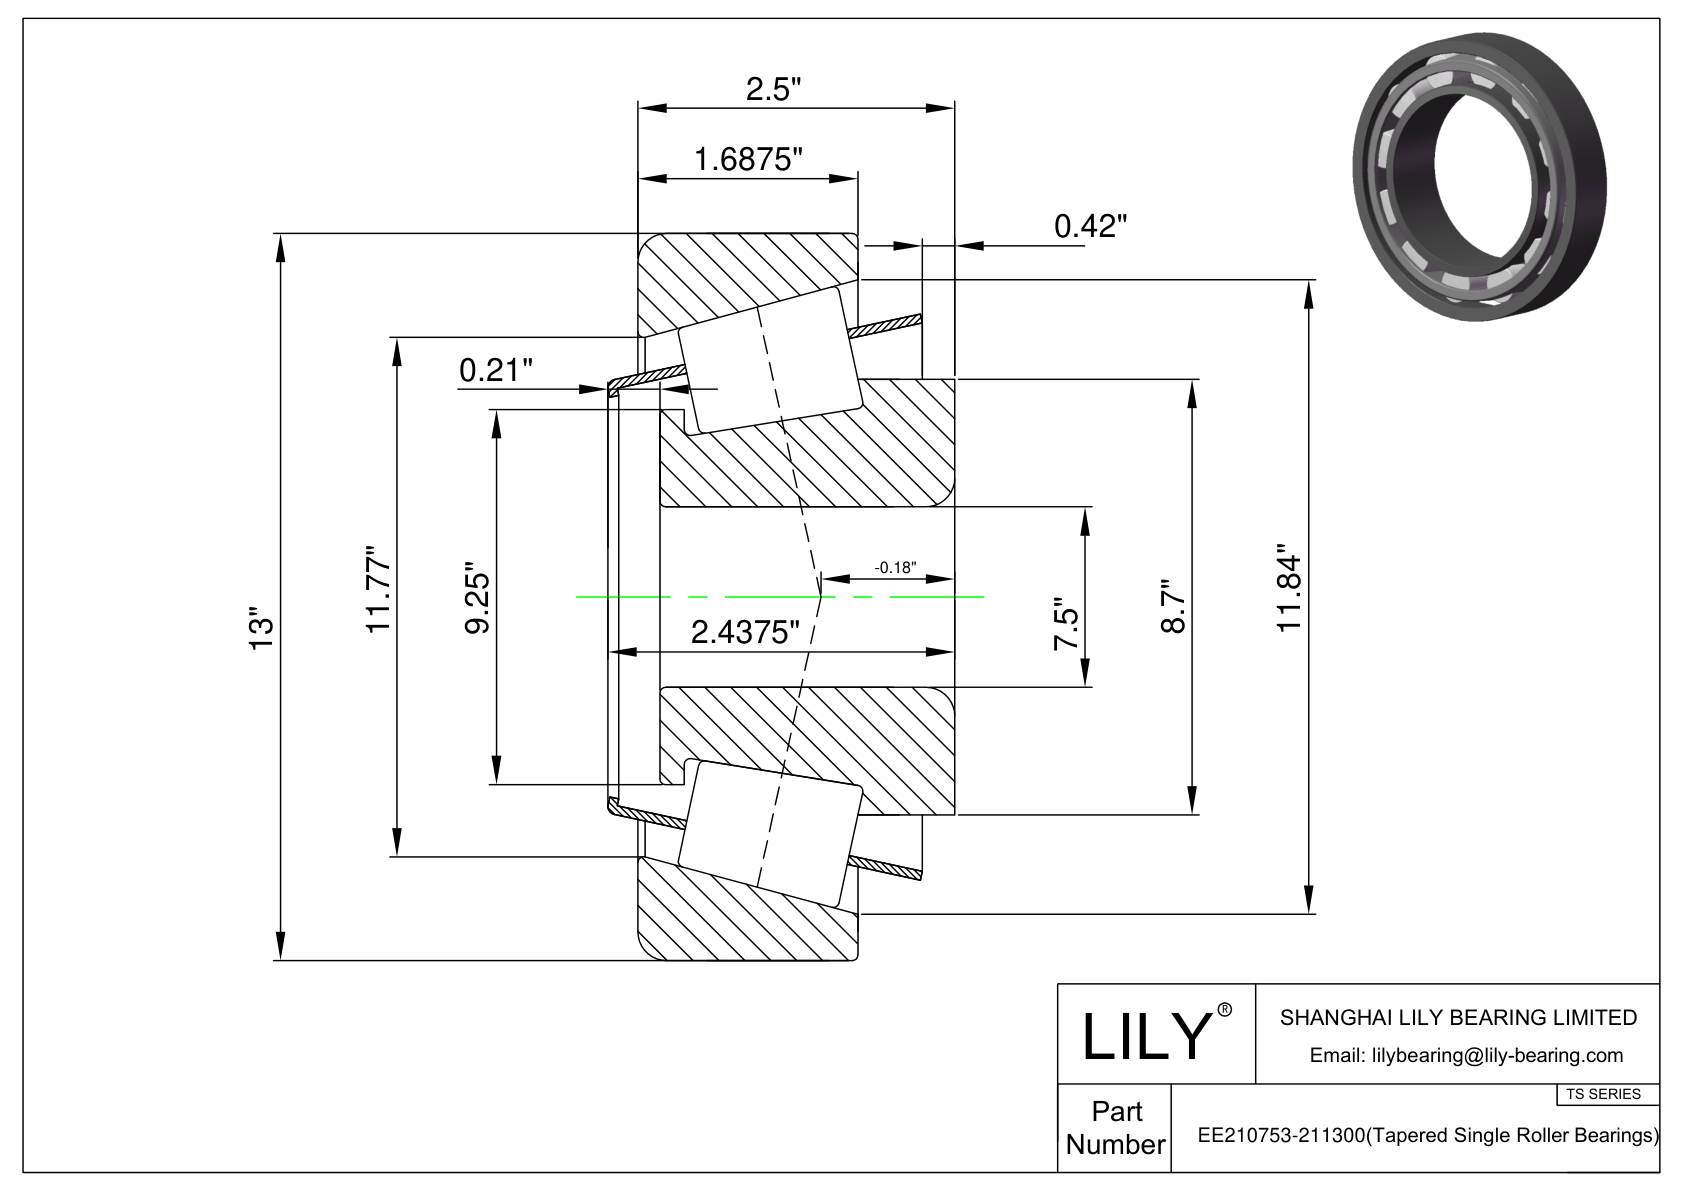 EE210753-211300 TS (Tapered Single Roller Bearings) (Imperial) cad drawing